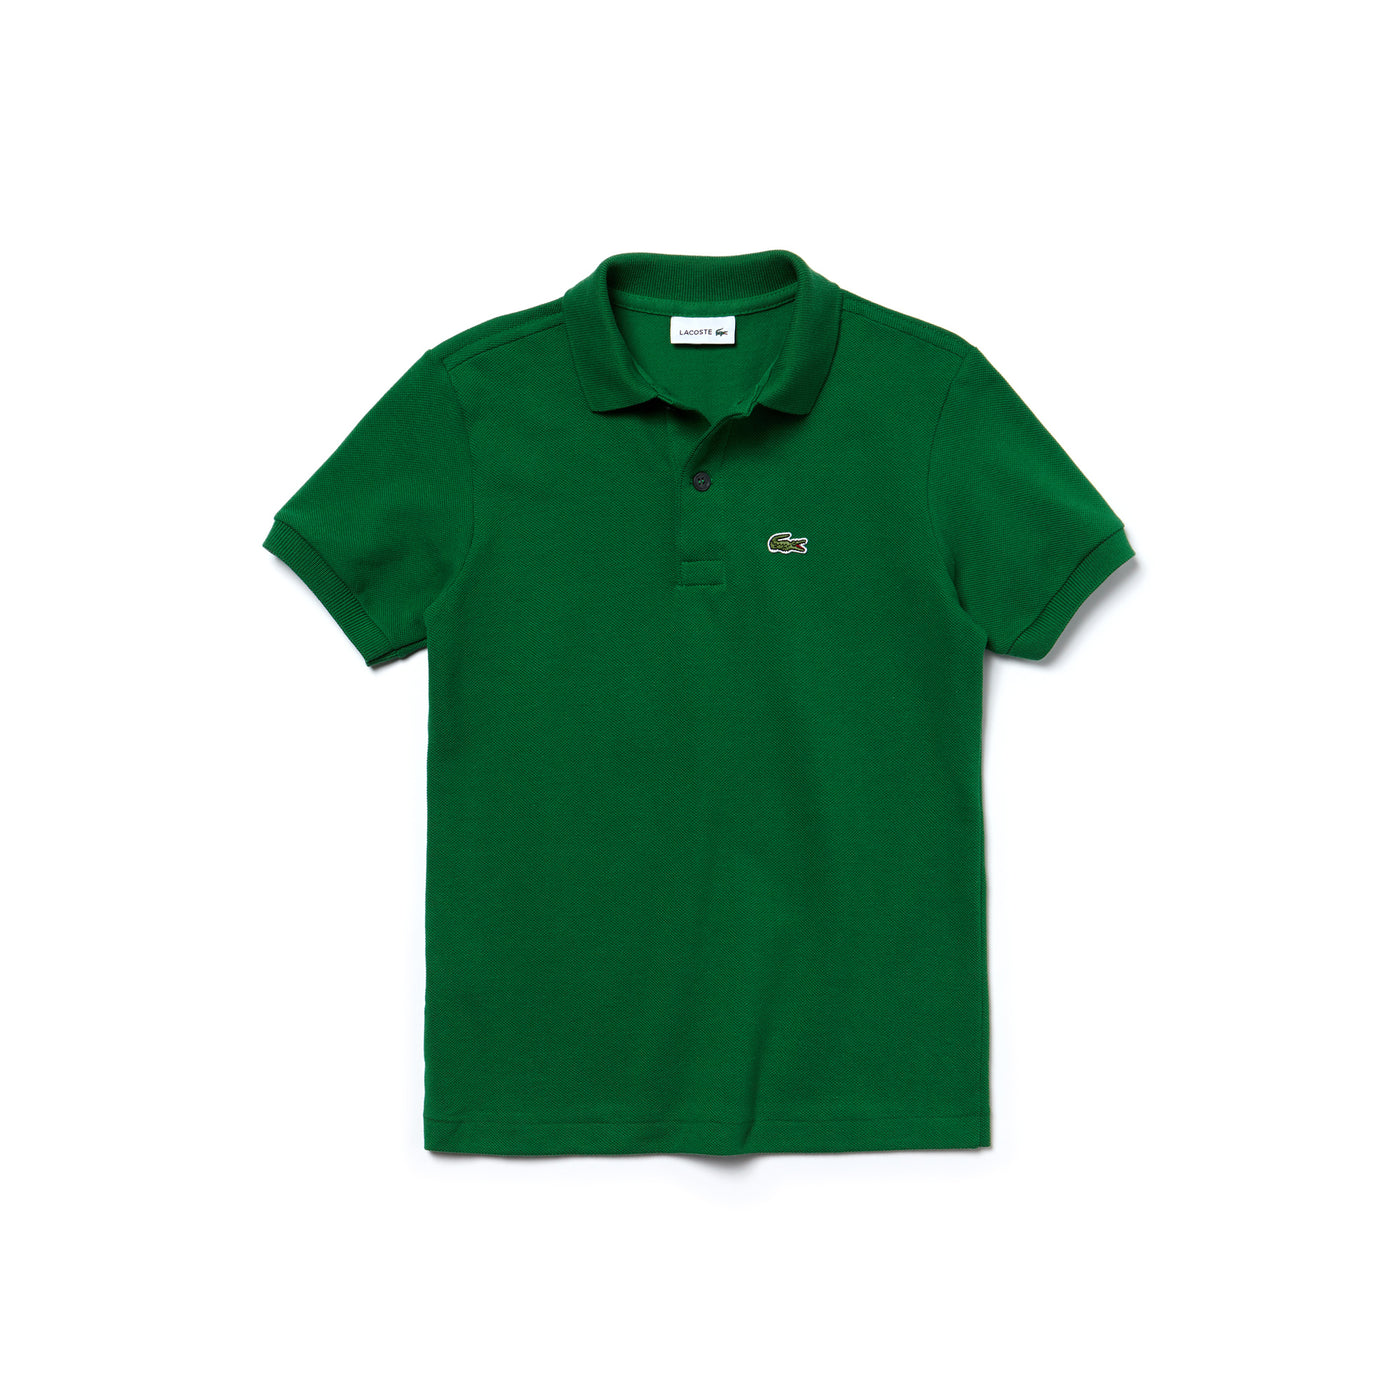 Shop The Latest Collection Of Outlet - Lacoste Kids' Lacoste Regular Fit Petit Piquã© Polo Shirt - Pj2909 In Lebanon